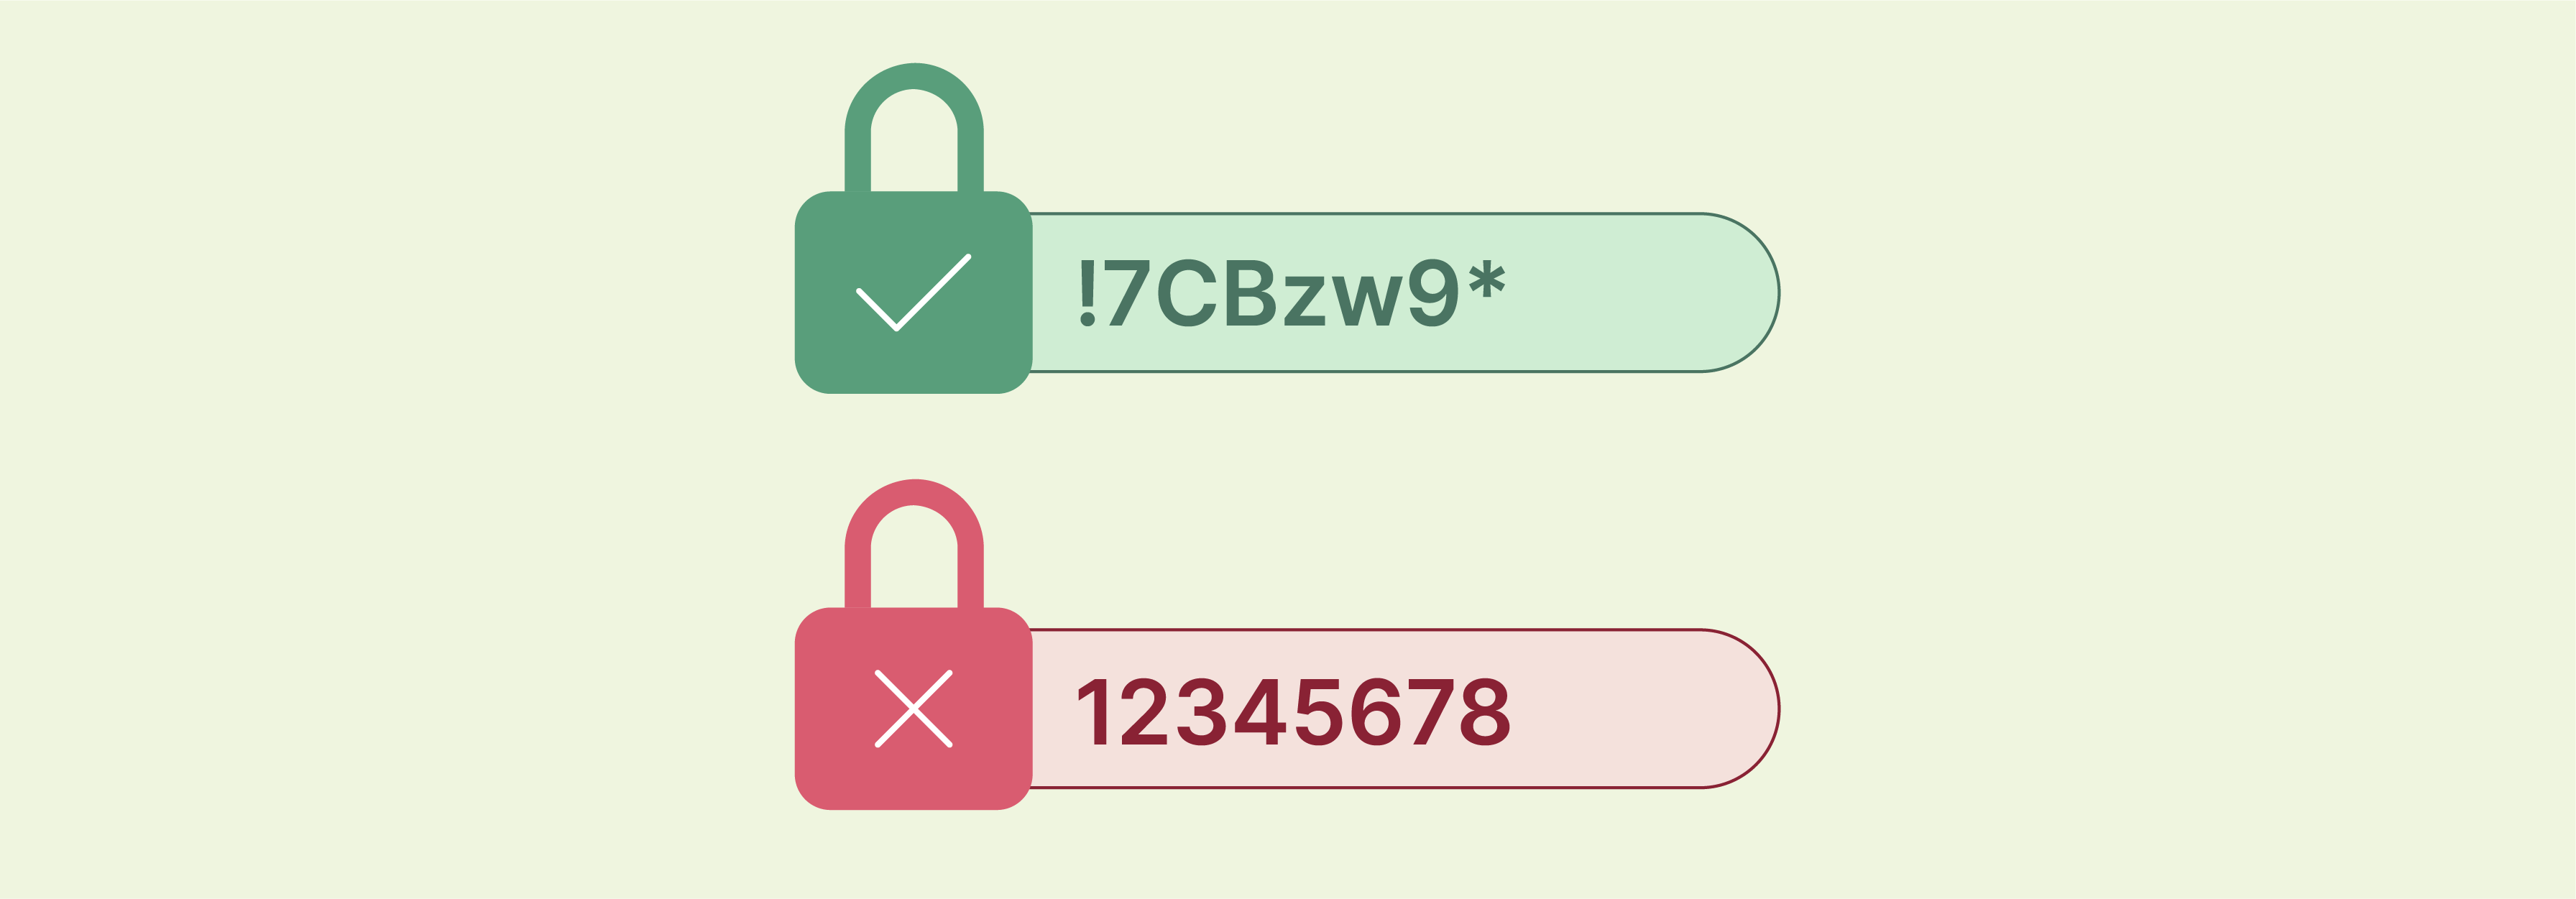 Importance of Strong Passwords in Magento Platform Security